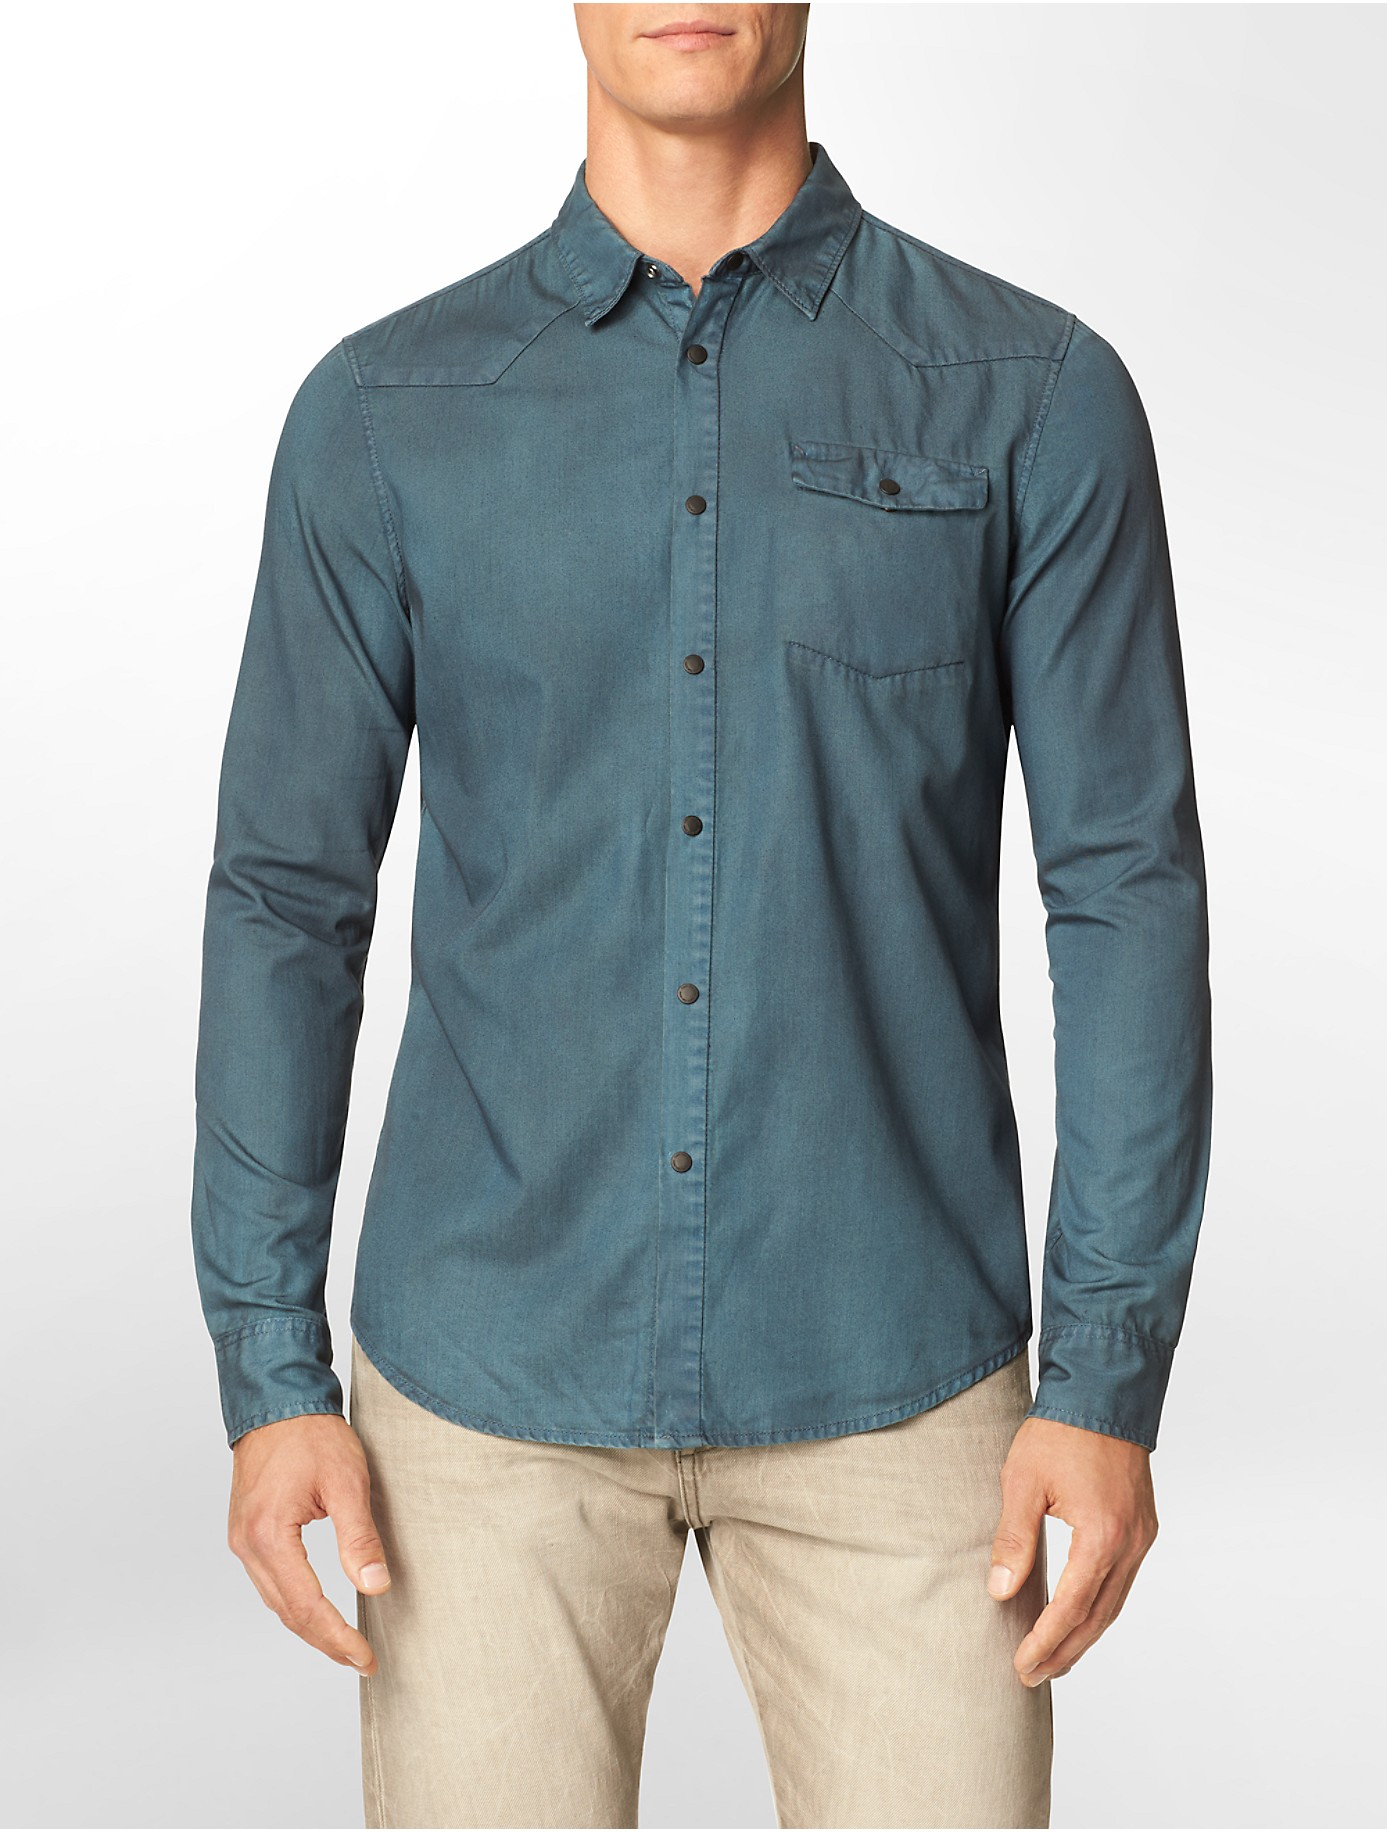 Calvin klein Jeans Slim Fit Chambray Snap Front Cotton Shirt in Blue ...